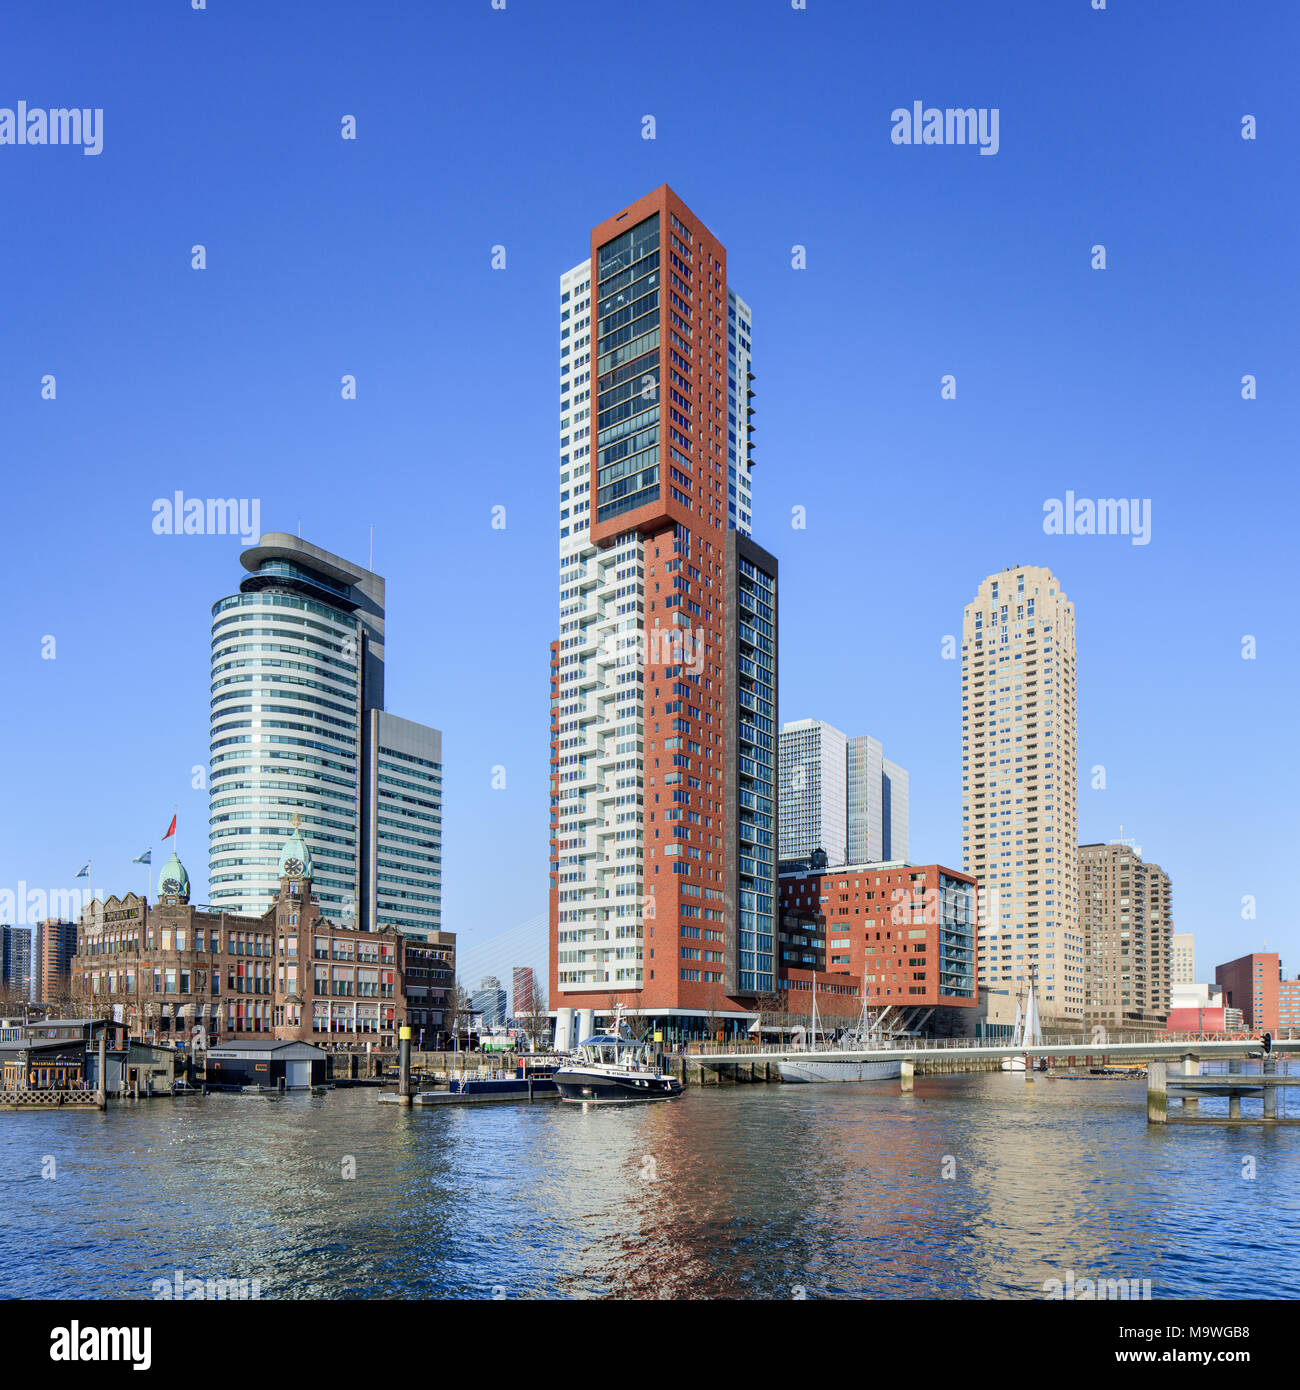 ROTTERDAM-FEBRUARY 7, 2018. Hotel New York, Montevideo tower and world Port at Kop van Zuid, a relatively new area on the south bank of the Maas. Stock Photo